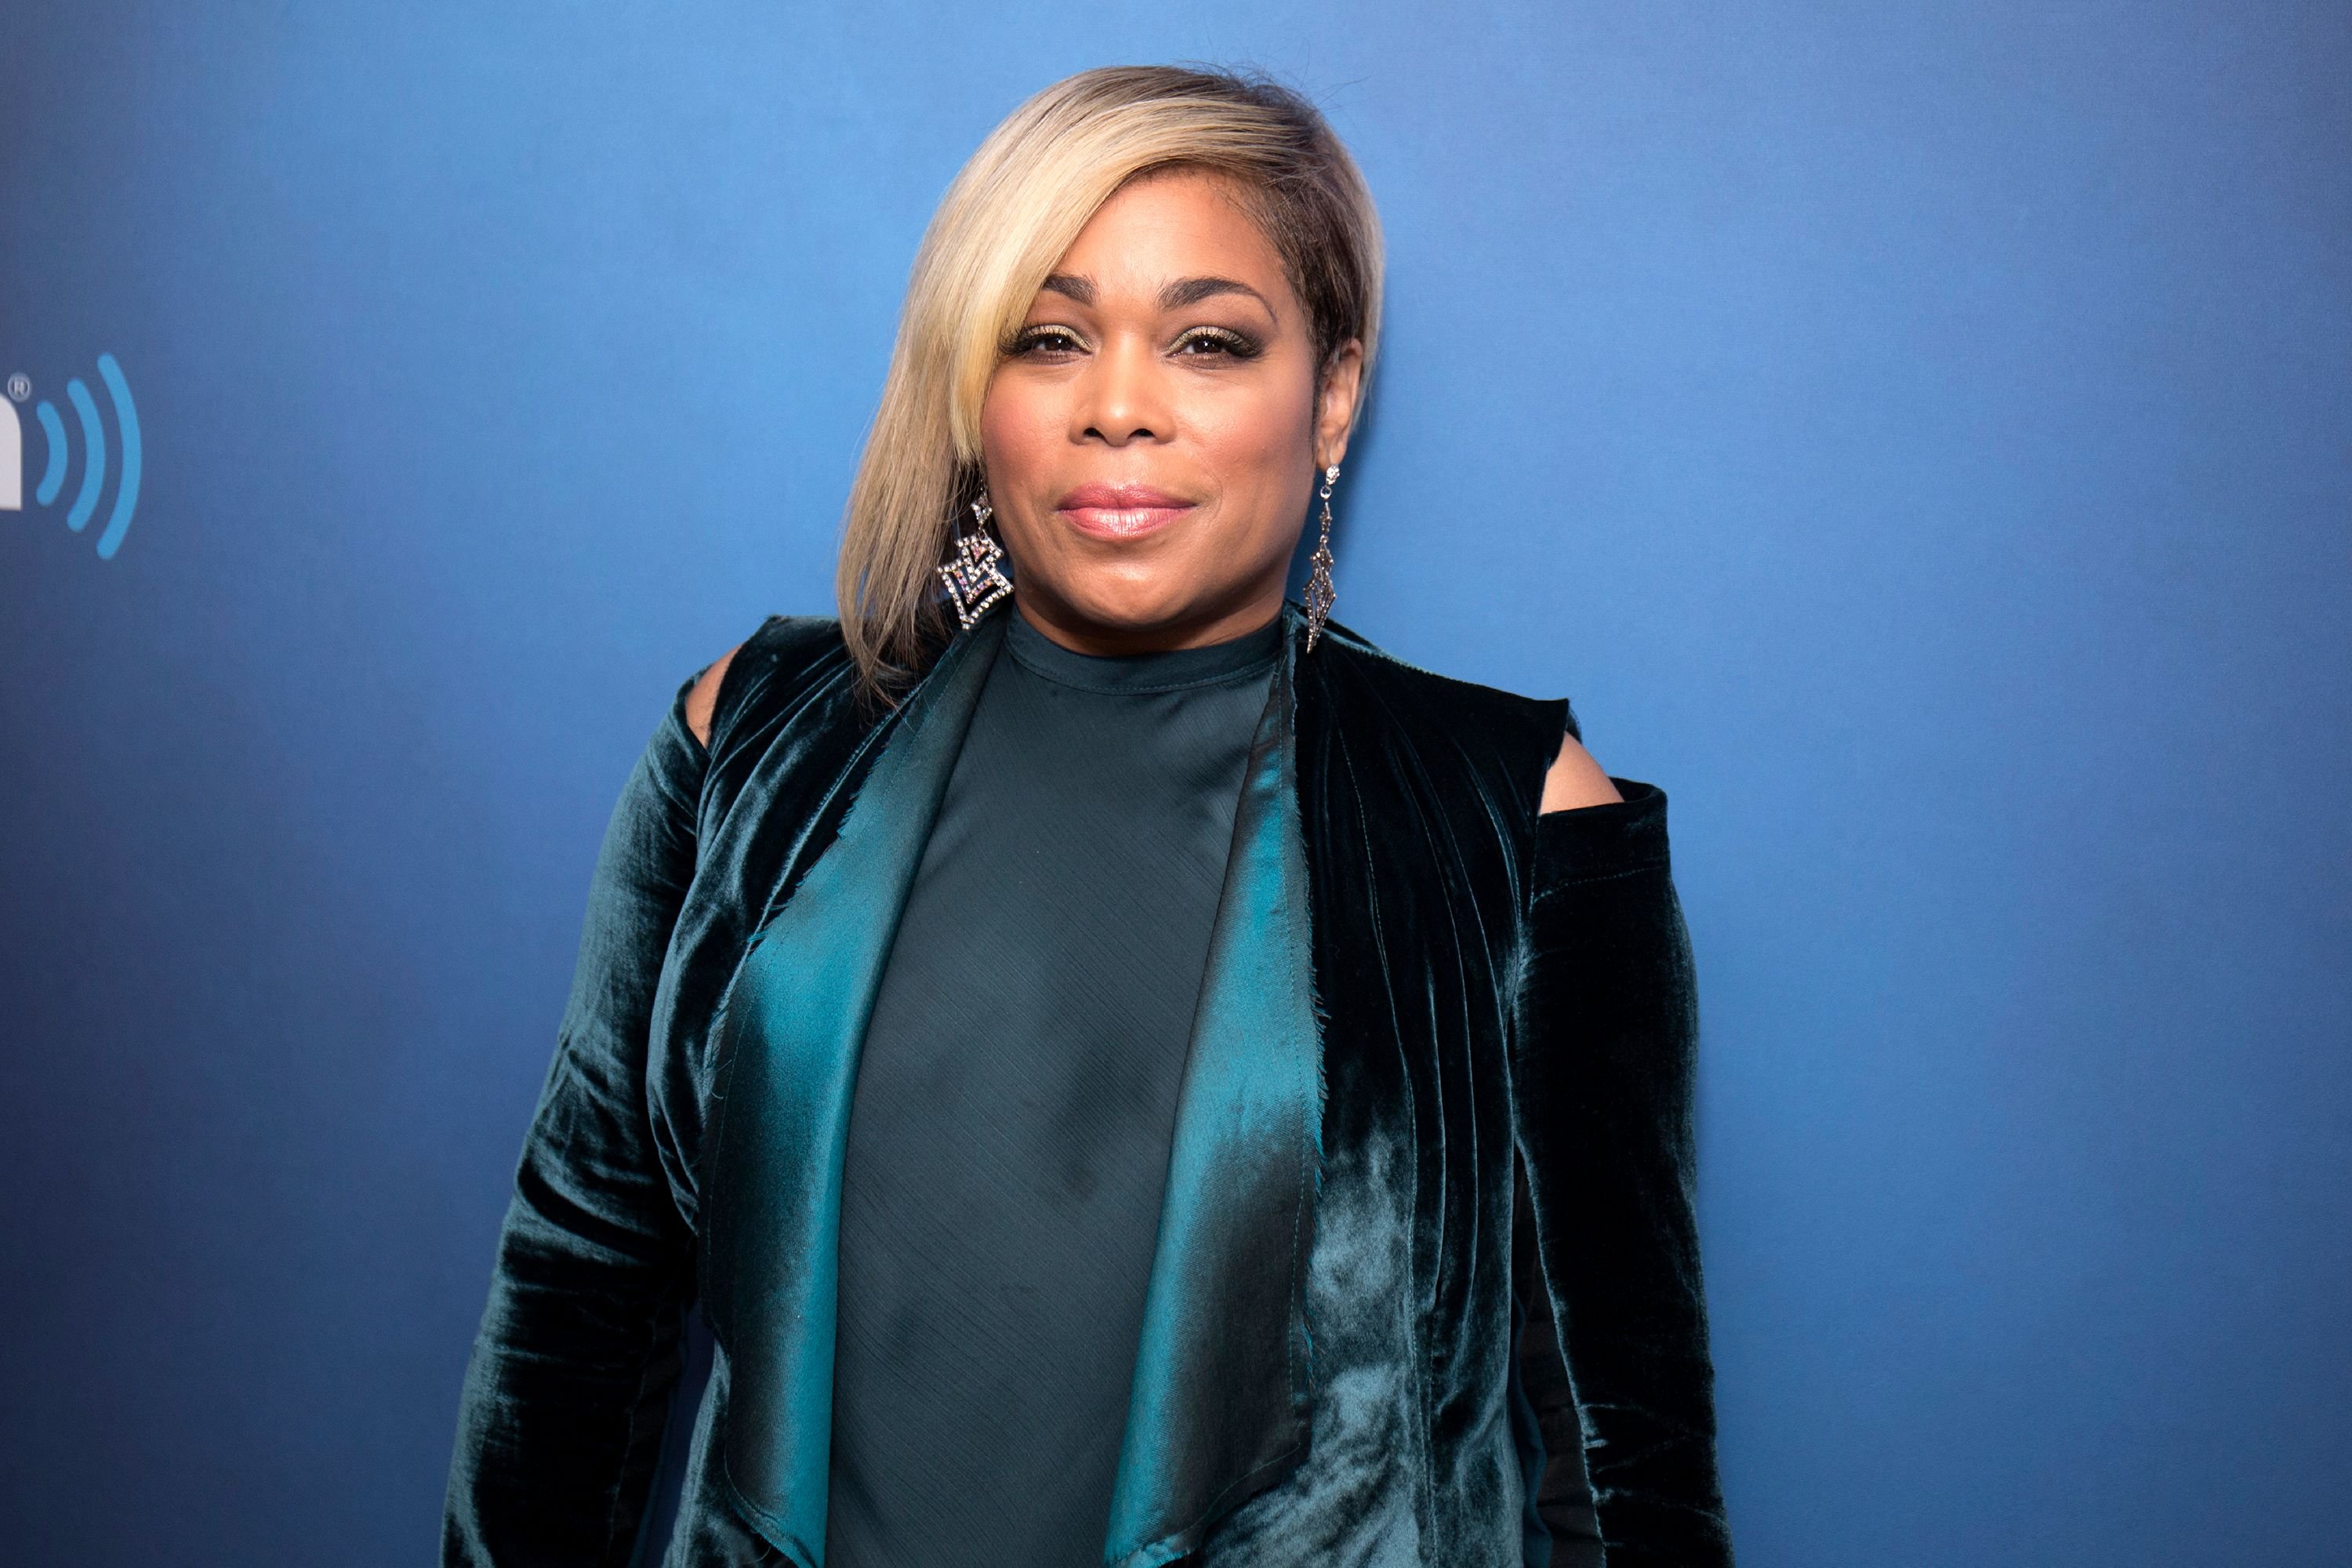 Tionne 'T-Boz' Watkins visits the SiriusXM Studios on September 12, 2017 in New York City. | Photo: Getty Images